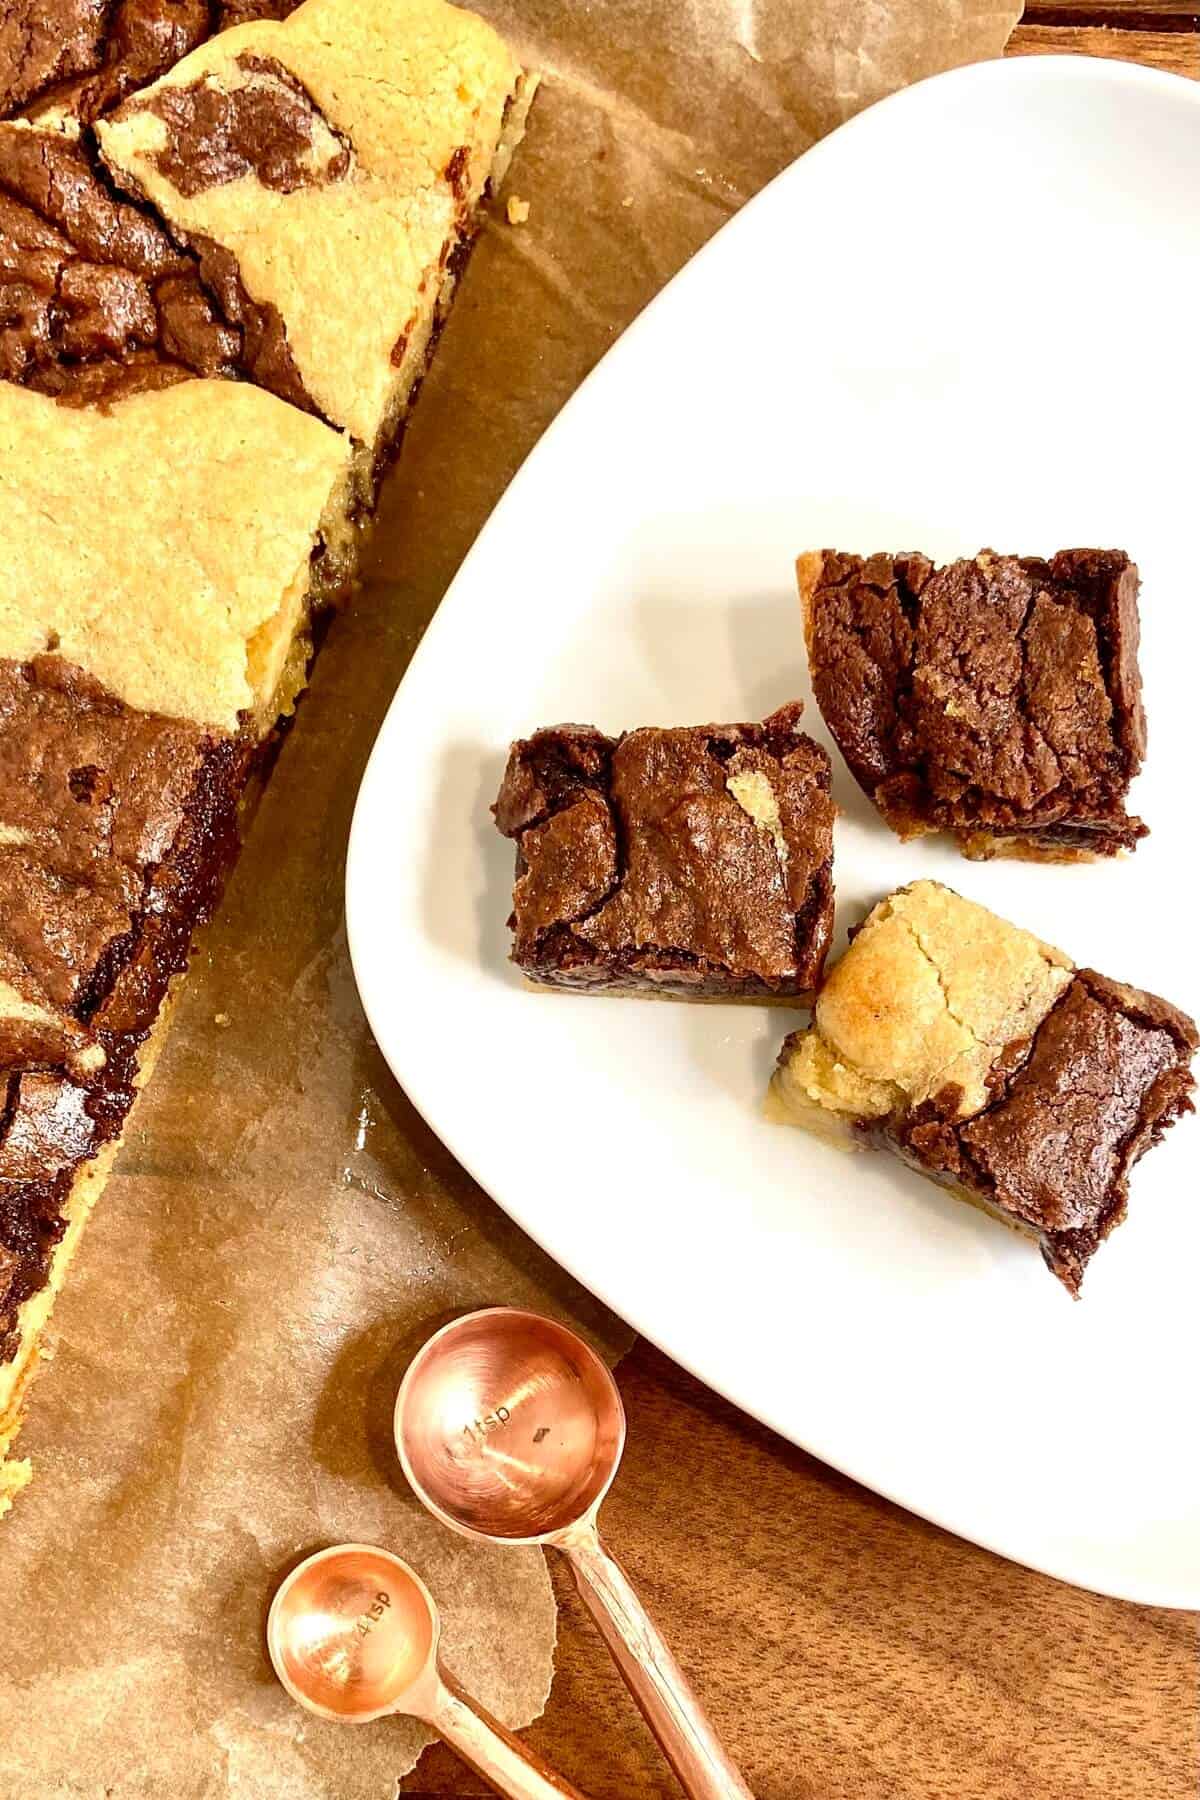 Three brownies on a plate, on a parchment lined table.